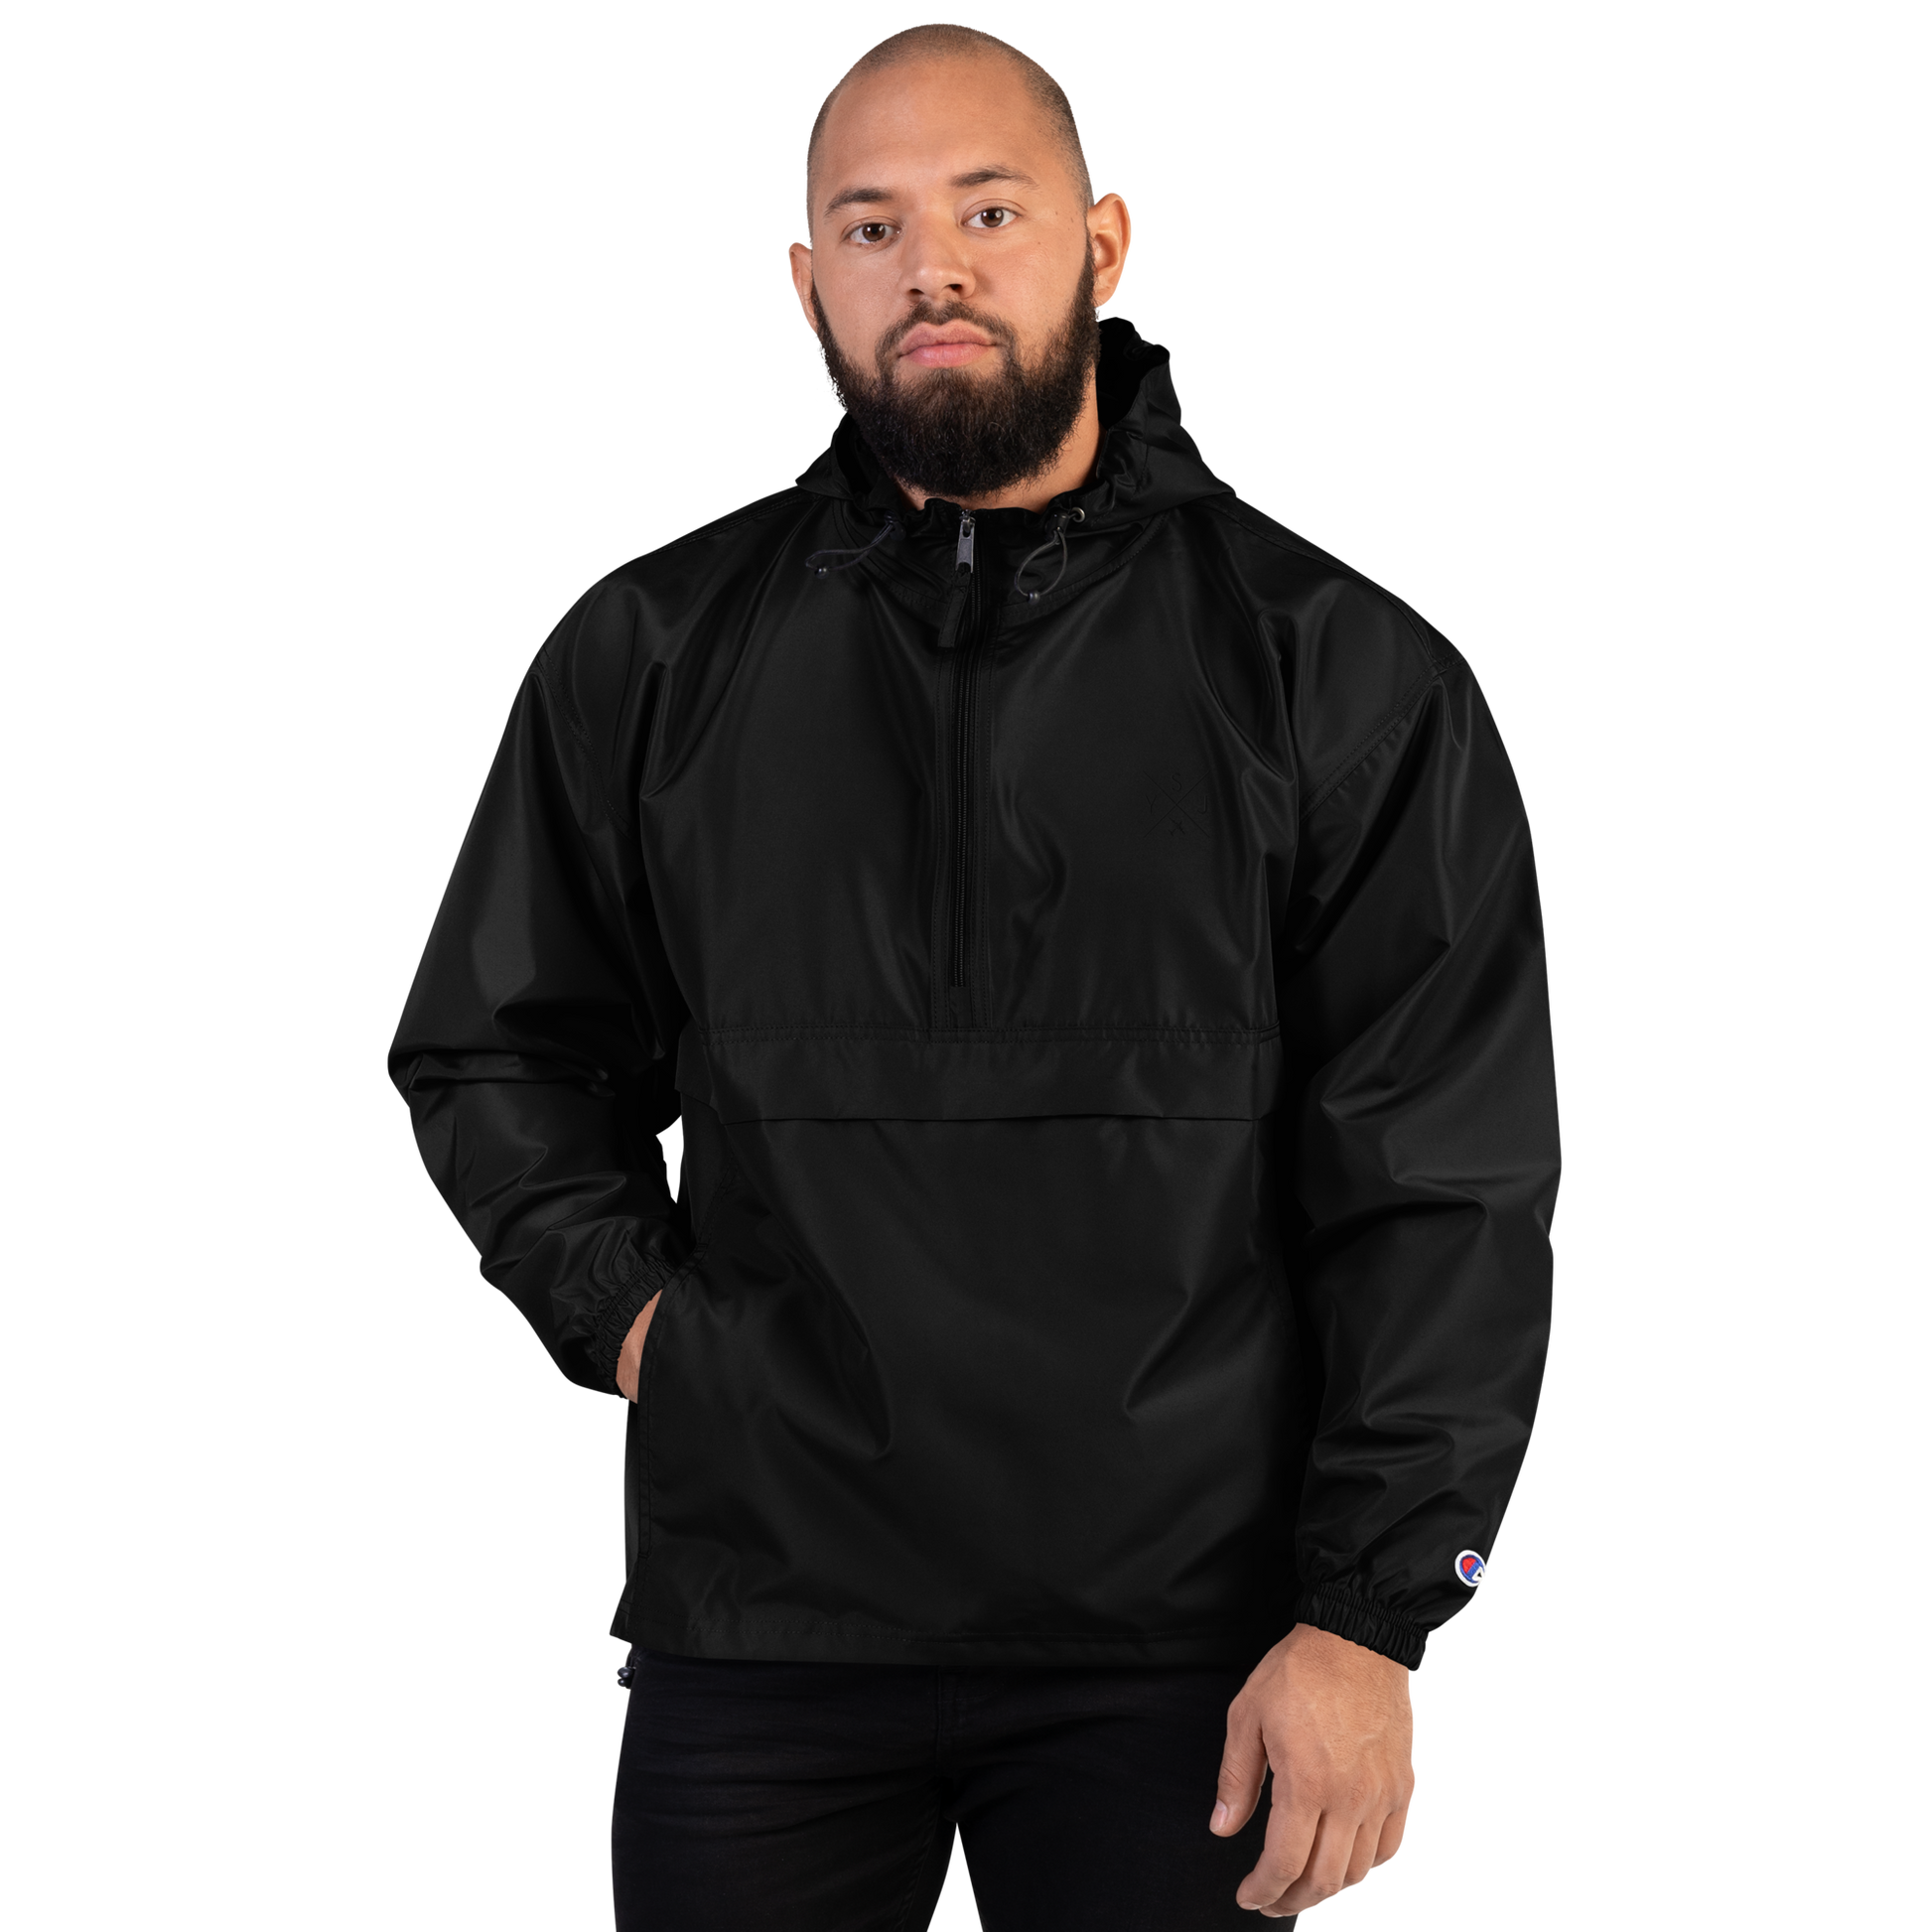 YHM Designs - YSJ Saint John Champion Packable Jacket - Crossed-X Design with Airport Code and Vintage Propliner - Black Embroidery - Image 09